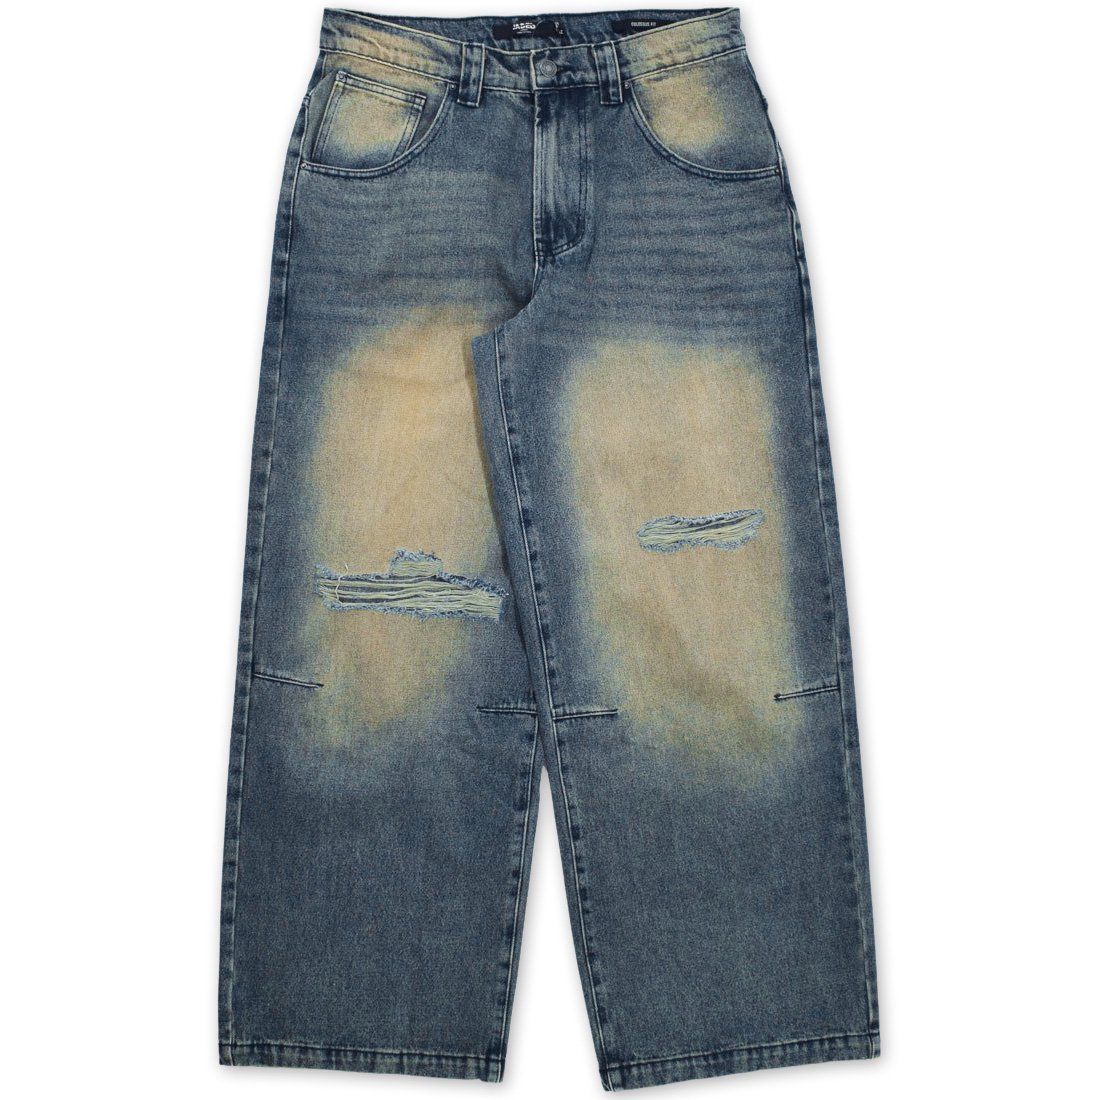 JADED LONDON BUSTED COLOSSUS JEANS - Spyder｜セレクトショップ 